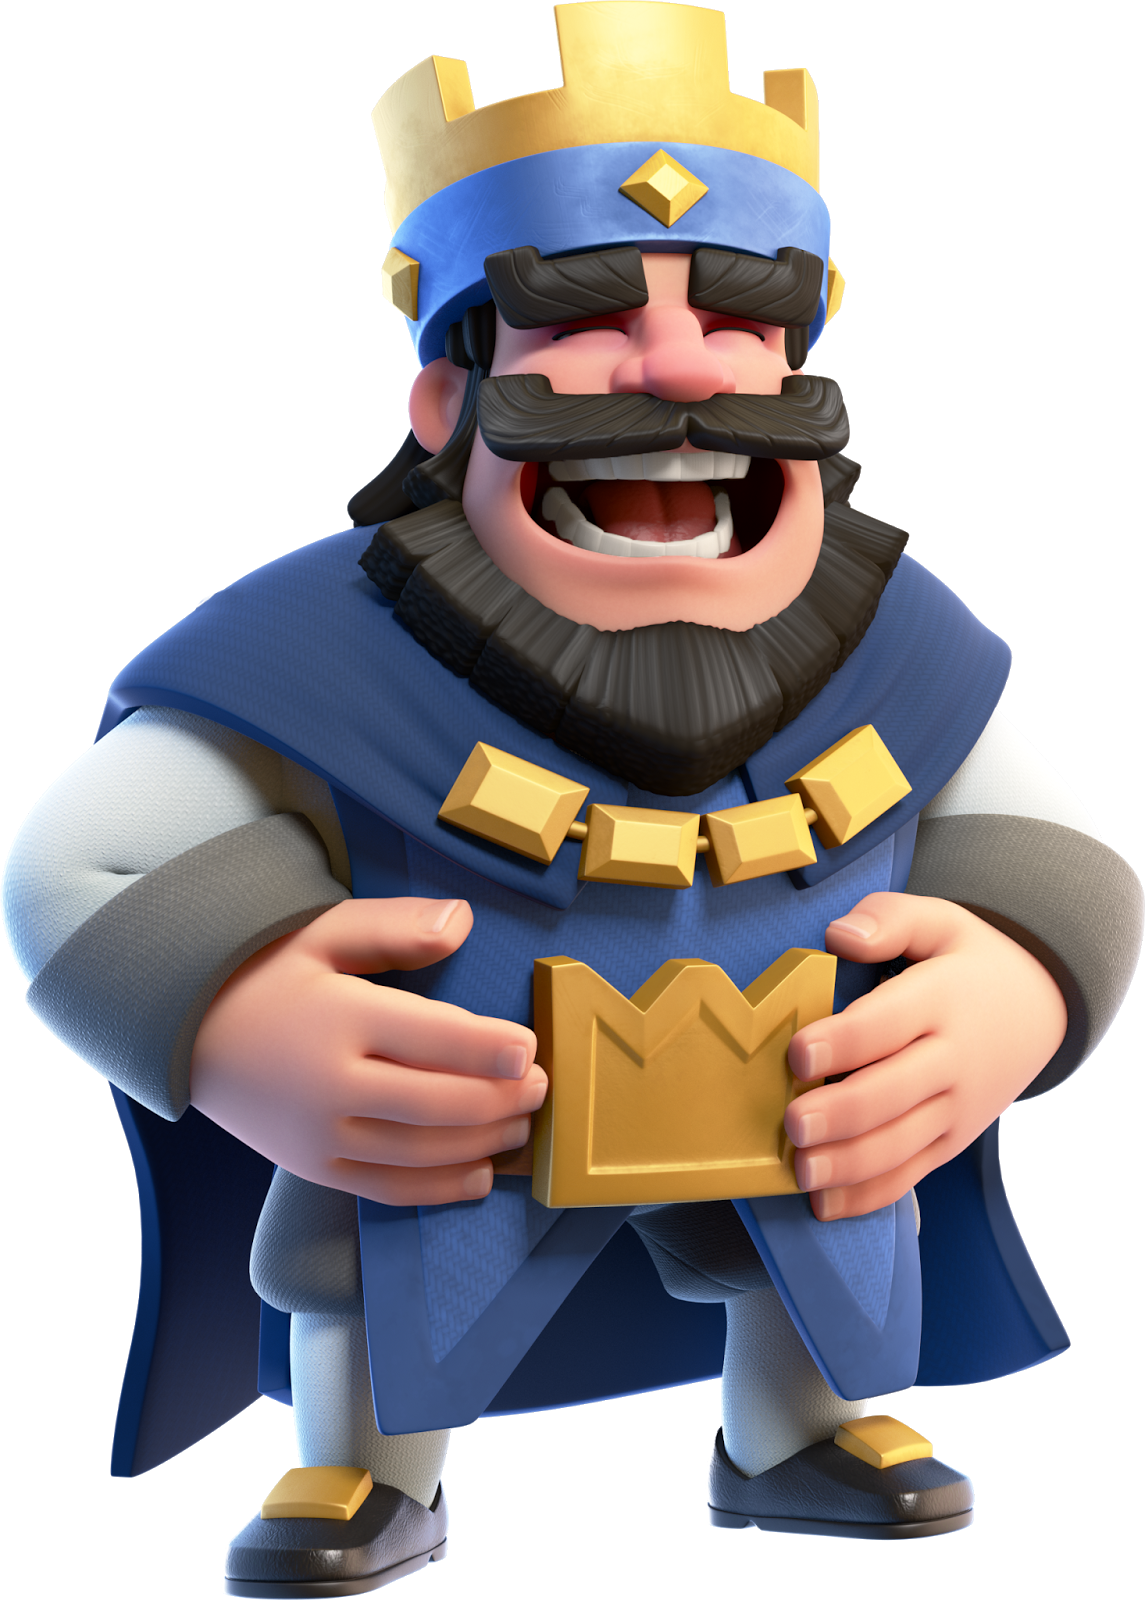 Download Clash Royale High Quality Png Transparent Background Free Download 46136 Freeiconspng